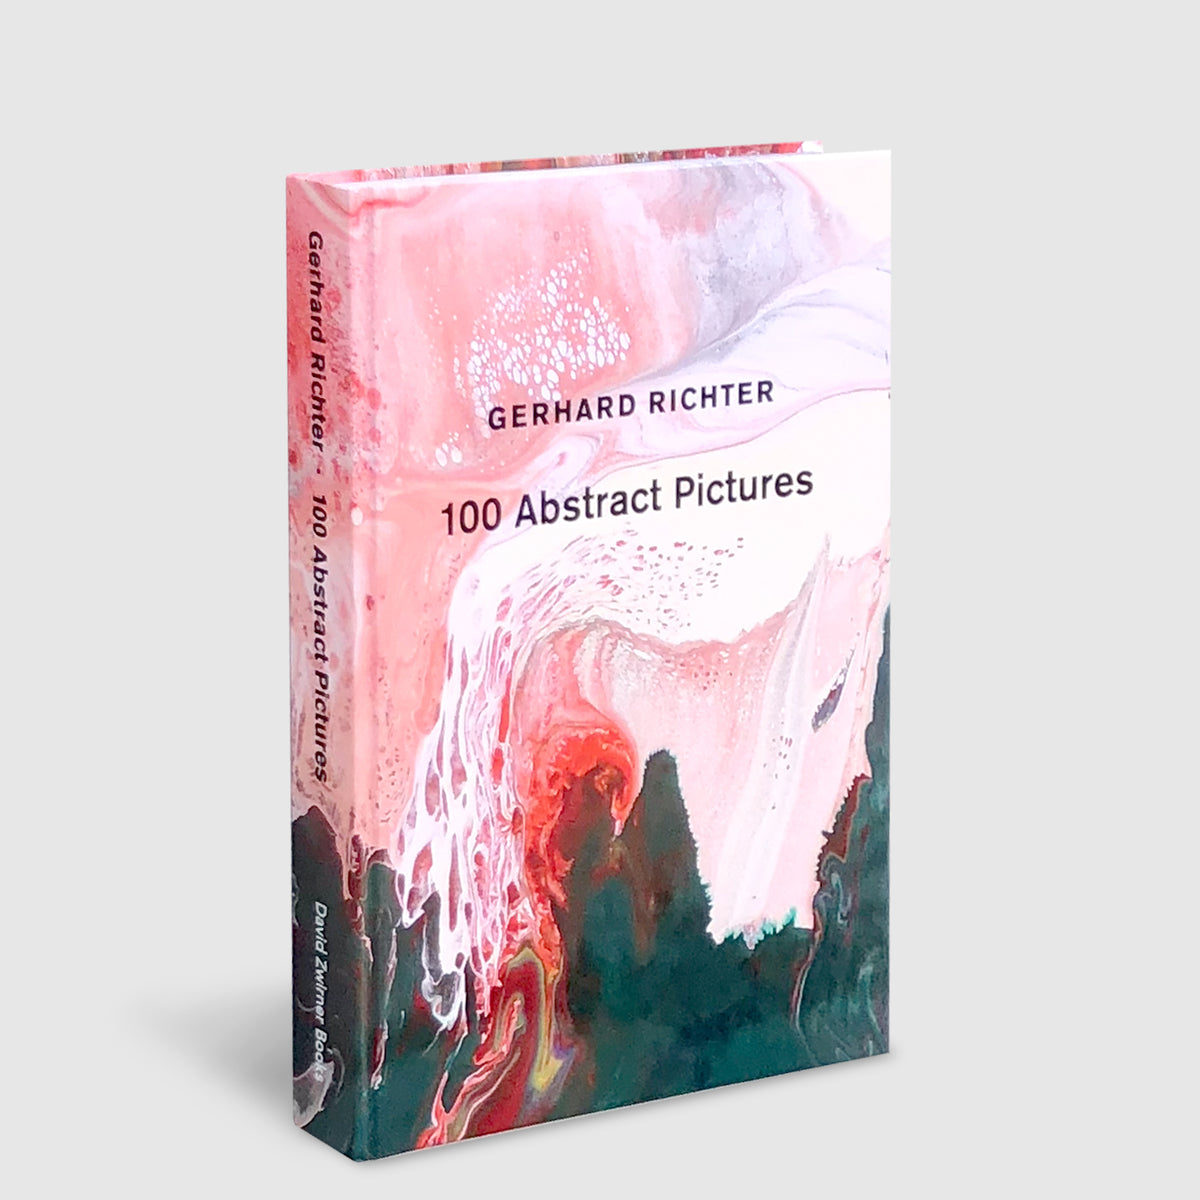 Gerhard Richter | 100 Abstract Pictures | Post Architecture Books